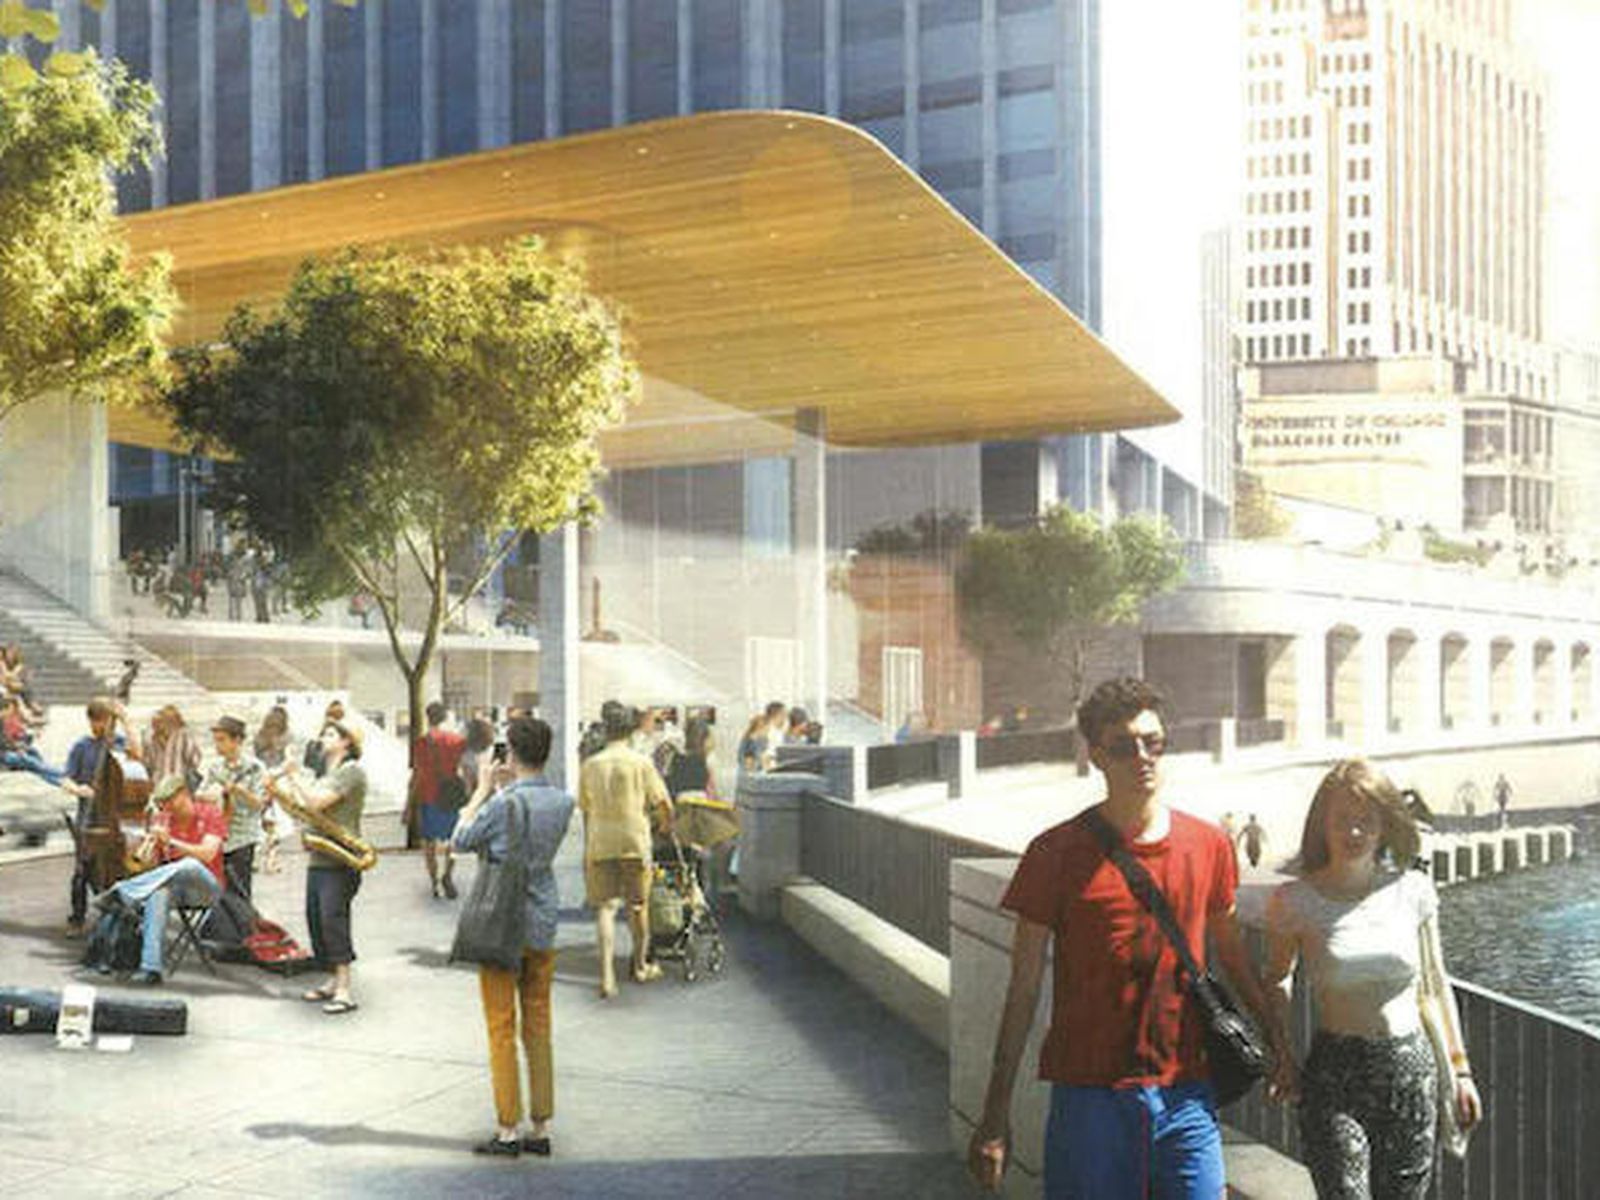 Apple shares latest vision for new Chicago River retail store as roof and  curved glass put in place - 9to5Mac